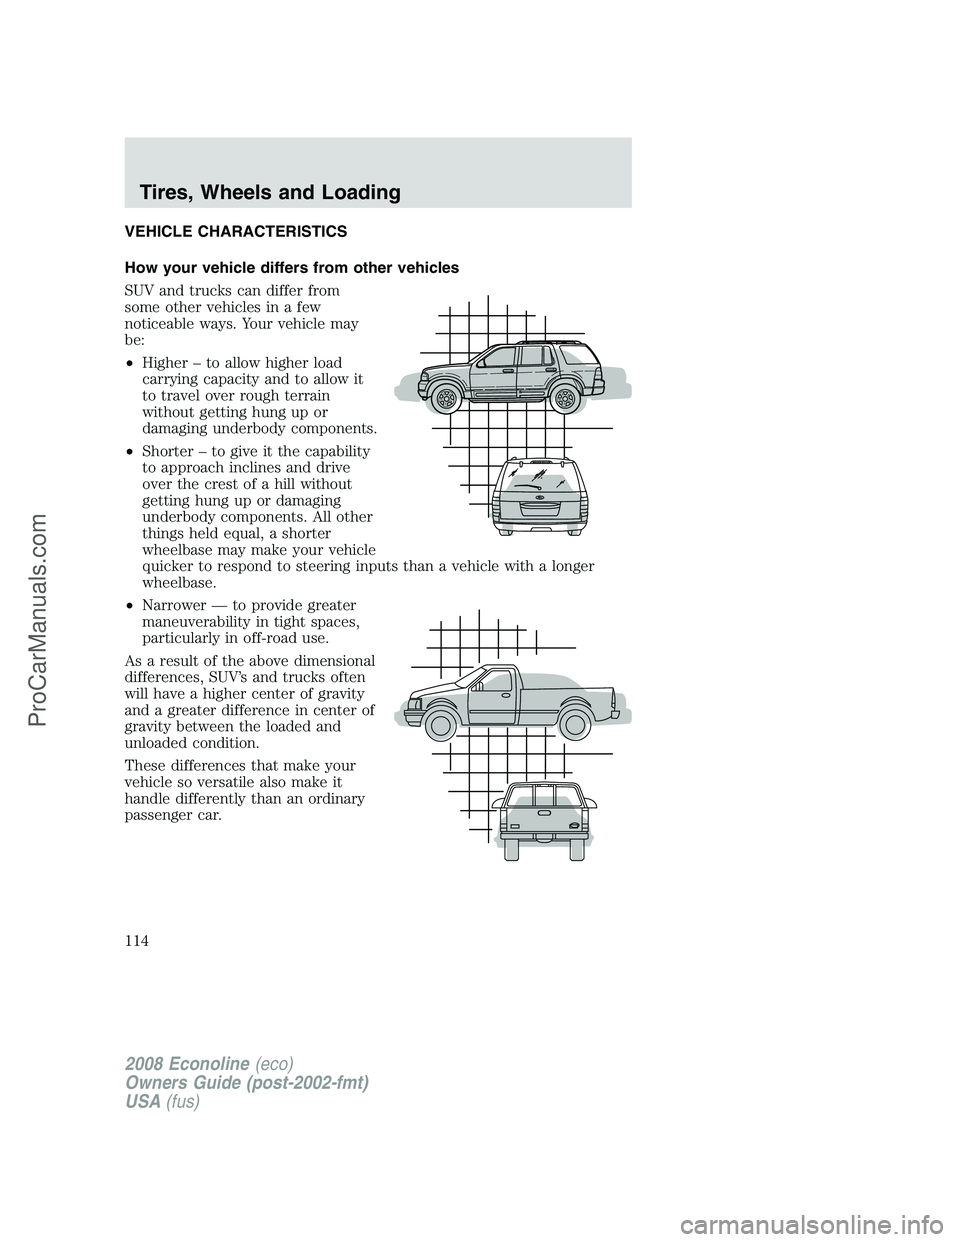 FORD E-450 2008  Owners Manual VEHICLE CHARACTERISTICS
How your vehicle differs from other vehicles
SUV and trucks can differ from
some other vehicles in a few
noticeable ways. Your vehicle may
be:
•Higher – to allow higher loa